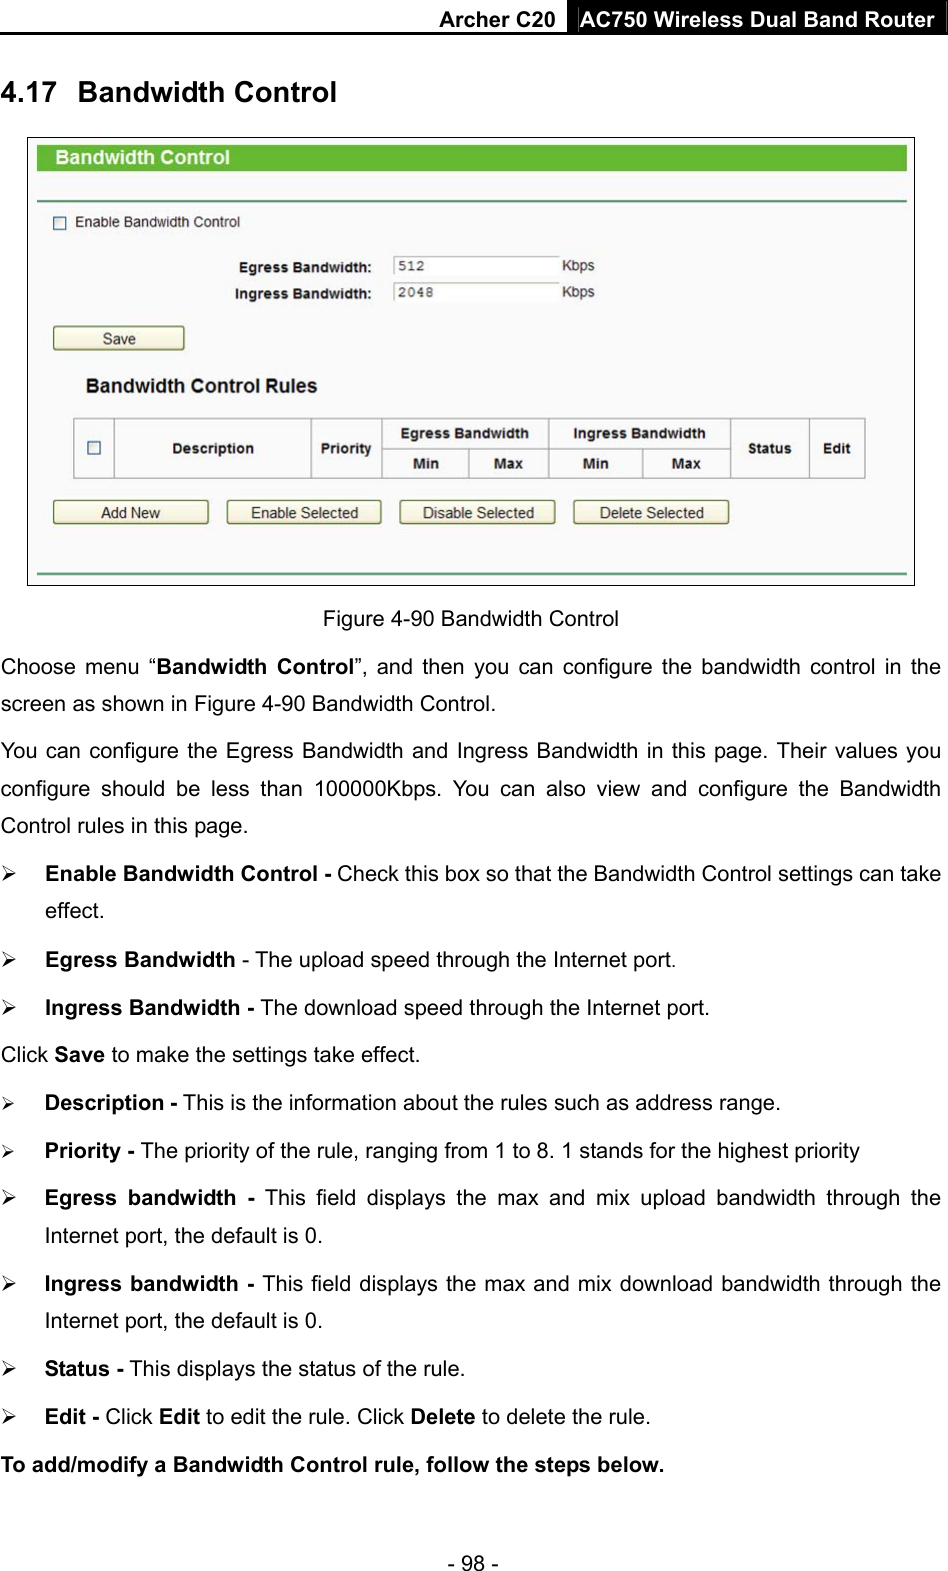 Archer C20 AC750 Wireless Dual Band Router - 98 - 4.17  Bandwidth Control  Figure 4-90 Bandwidth Control   Choose menu “Bandwidth Control”, and then you can configure the bandwidth control in the screen as shown in Figure 4-90 Bandwidth Control.  You can configure the Egress Bandwidth and Ingress Bandwidth in this page. Their values you configure should be less than 100000Kbps. You can also view and configure the Bandwidth Control rules in this page.  Enable Bandwidth Control - Check this box so that the Bandwidth Control settings can take effect.  Egress Bandwidth - The upload speed through the Internet port.  Ingress Bandwidth - The download speed through the Internet port. Click Save to make the settings take effect.  Description - This is the information about the rules such as address range.  Priority - The priority of the rule, ranging from 1 to 8. 1 stands for the highest priority  Egress bandwidth - This field displays the max and mix upload bandwidth through the Internet port, the default is 0.  Ingress bandwidth - This field displays the max and mix download bandwidth through the Internet port, the default is 0.  Status - This displays the status of the rule.  Edit - Click Edit to edit the rule. Click Delete to delete the rule. To add/modify a Bandwidth Control rule, follow the steps below. 